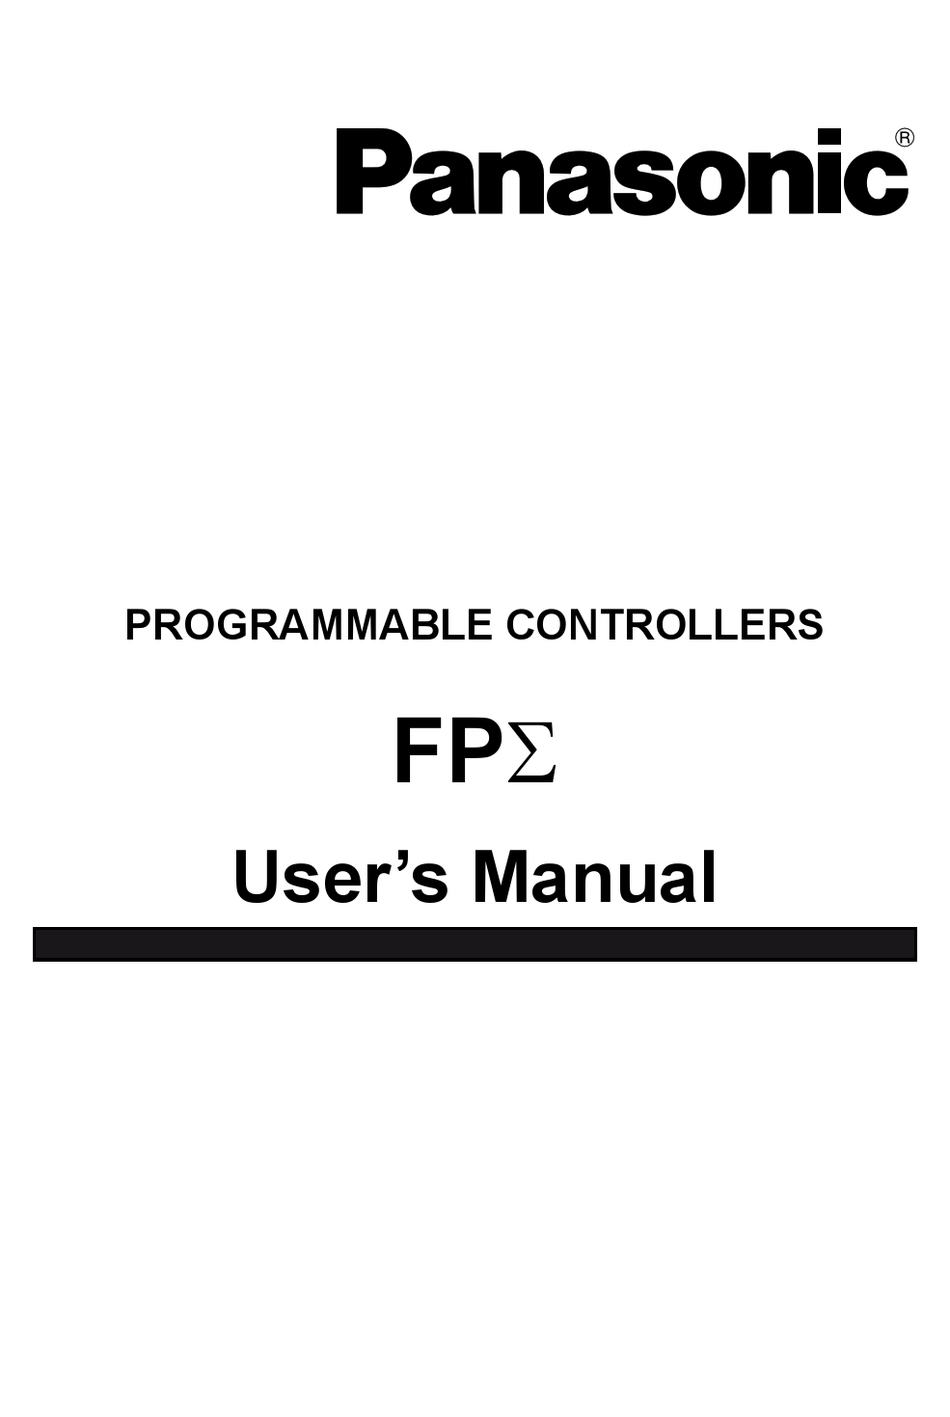 FPX Payment - SPEEDHOME Guide